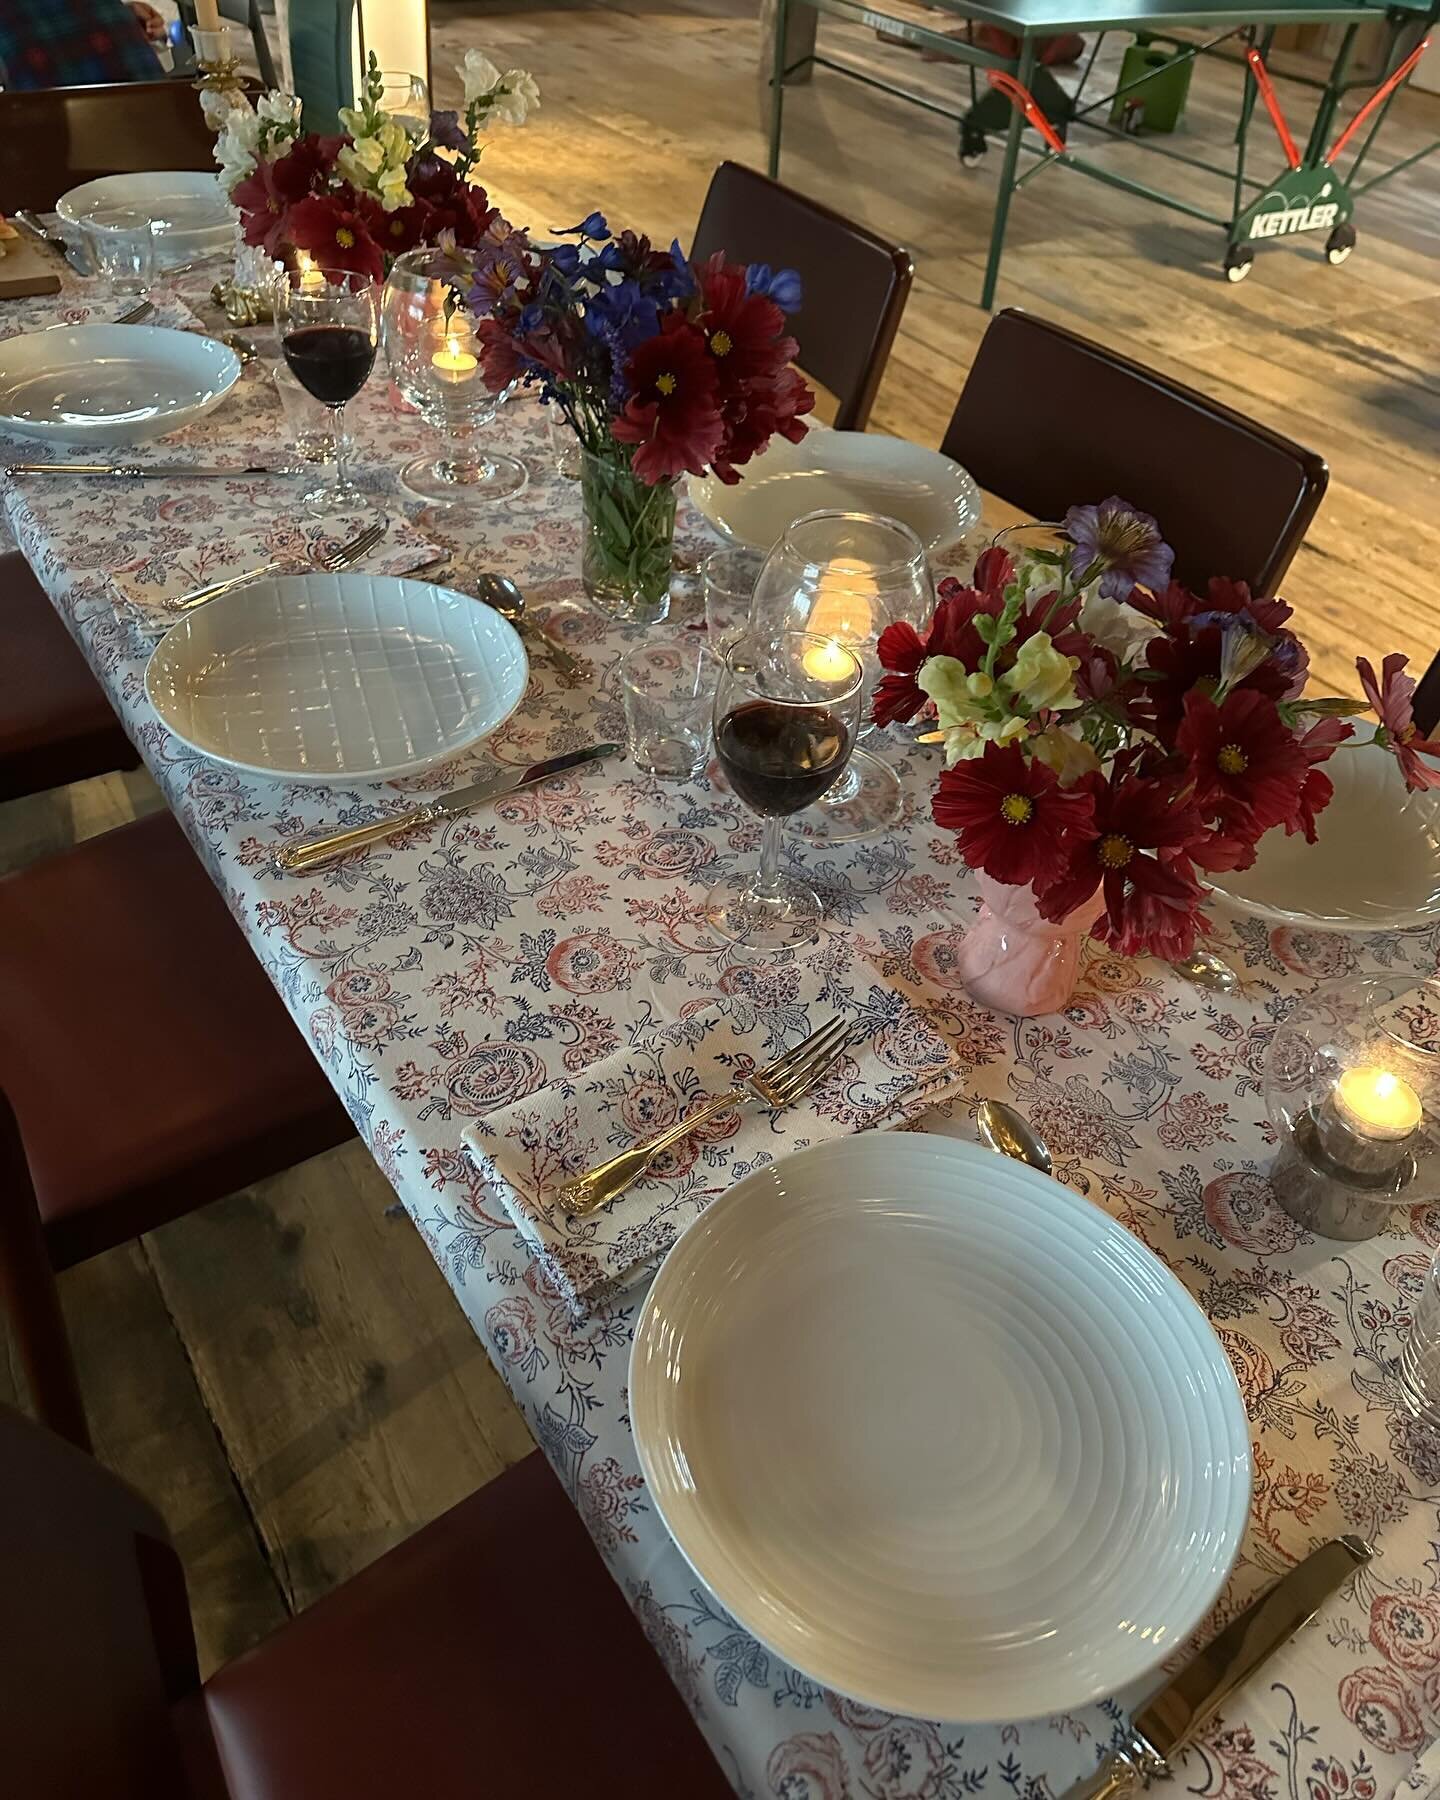 Getting into my table settings @the_bigredbarn lately #tablesetting